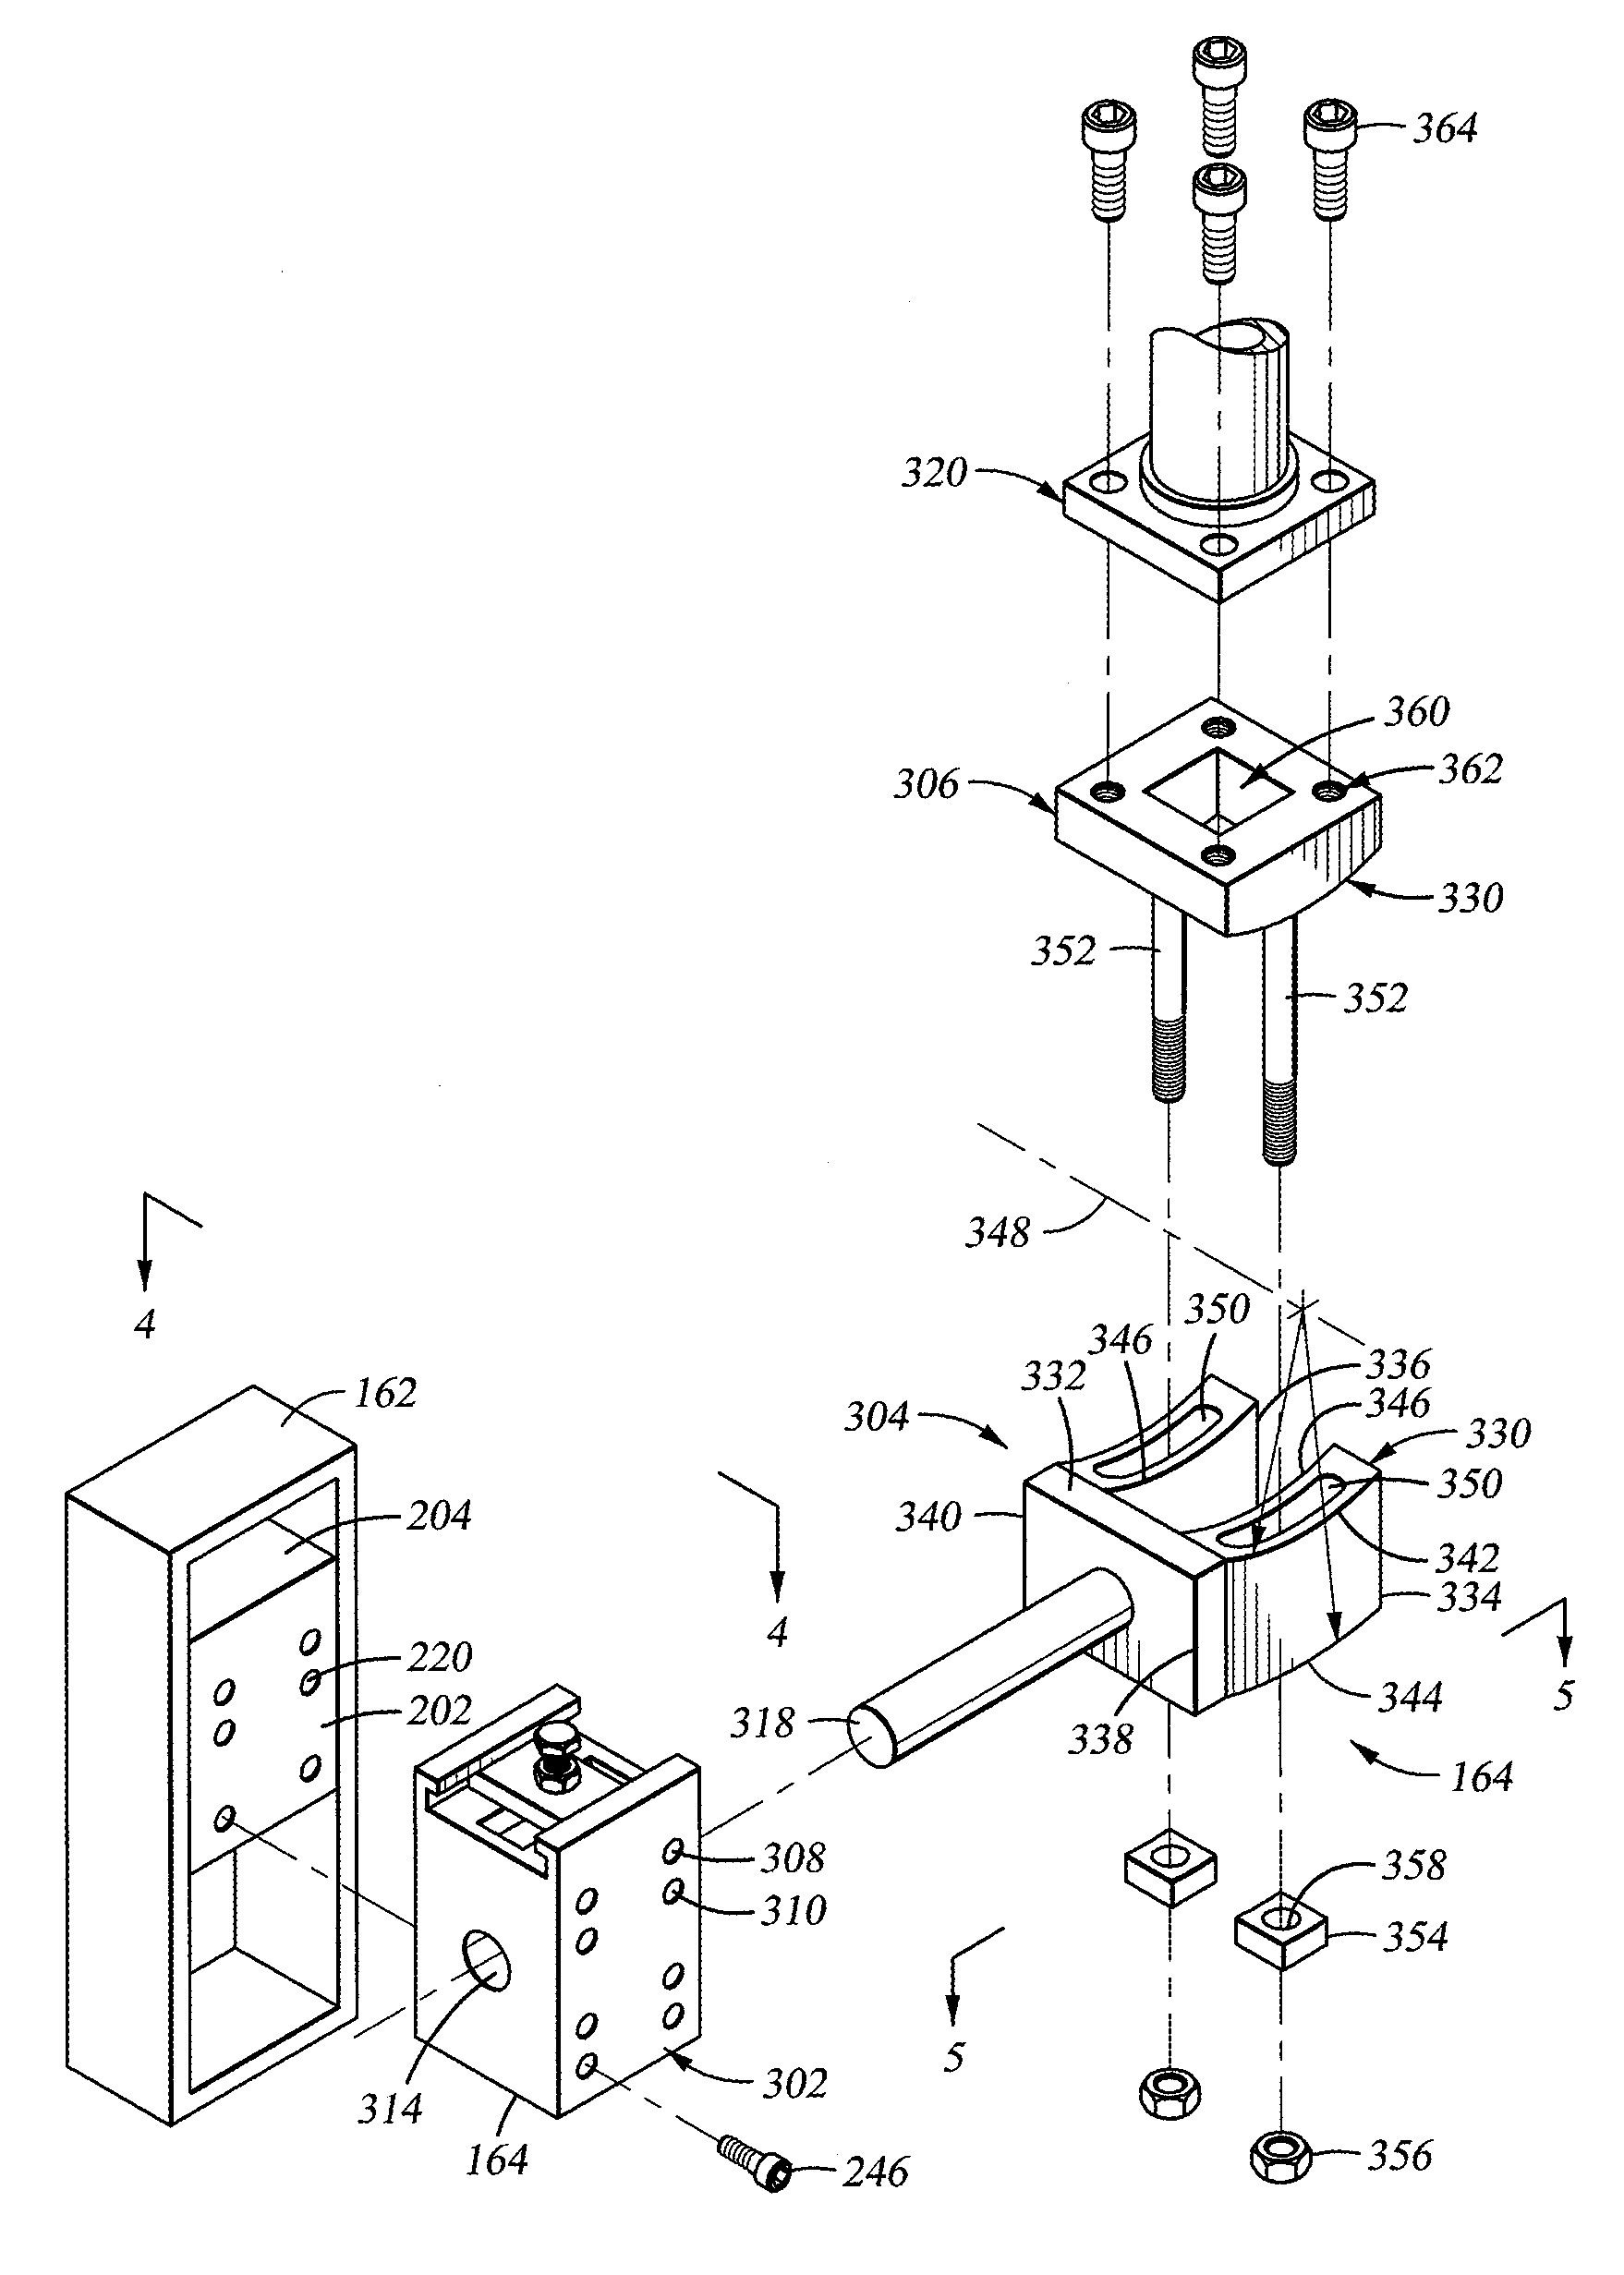 Substrate support lift mechanism